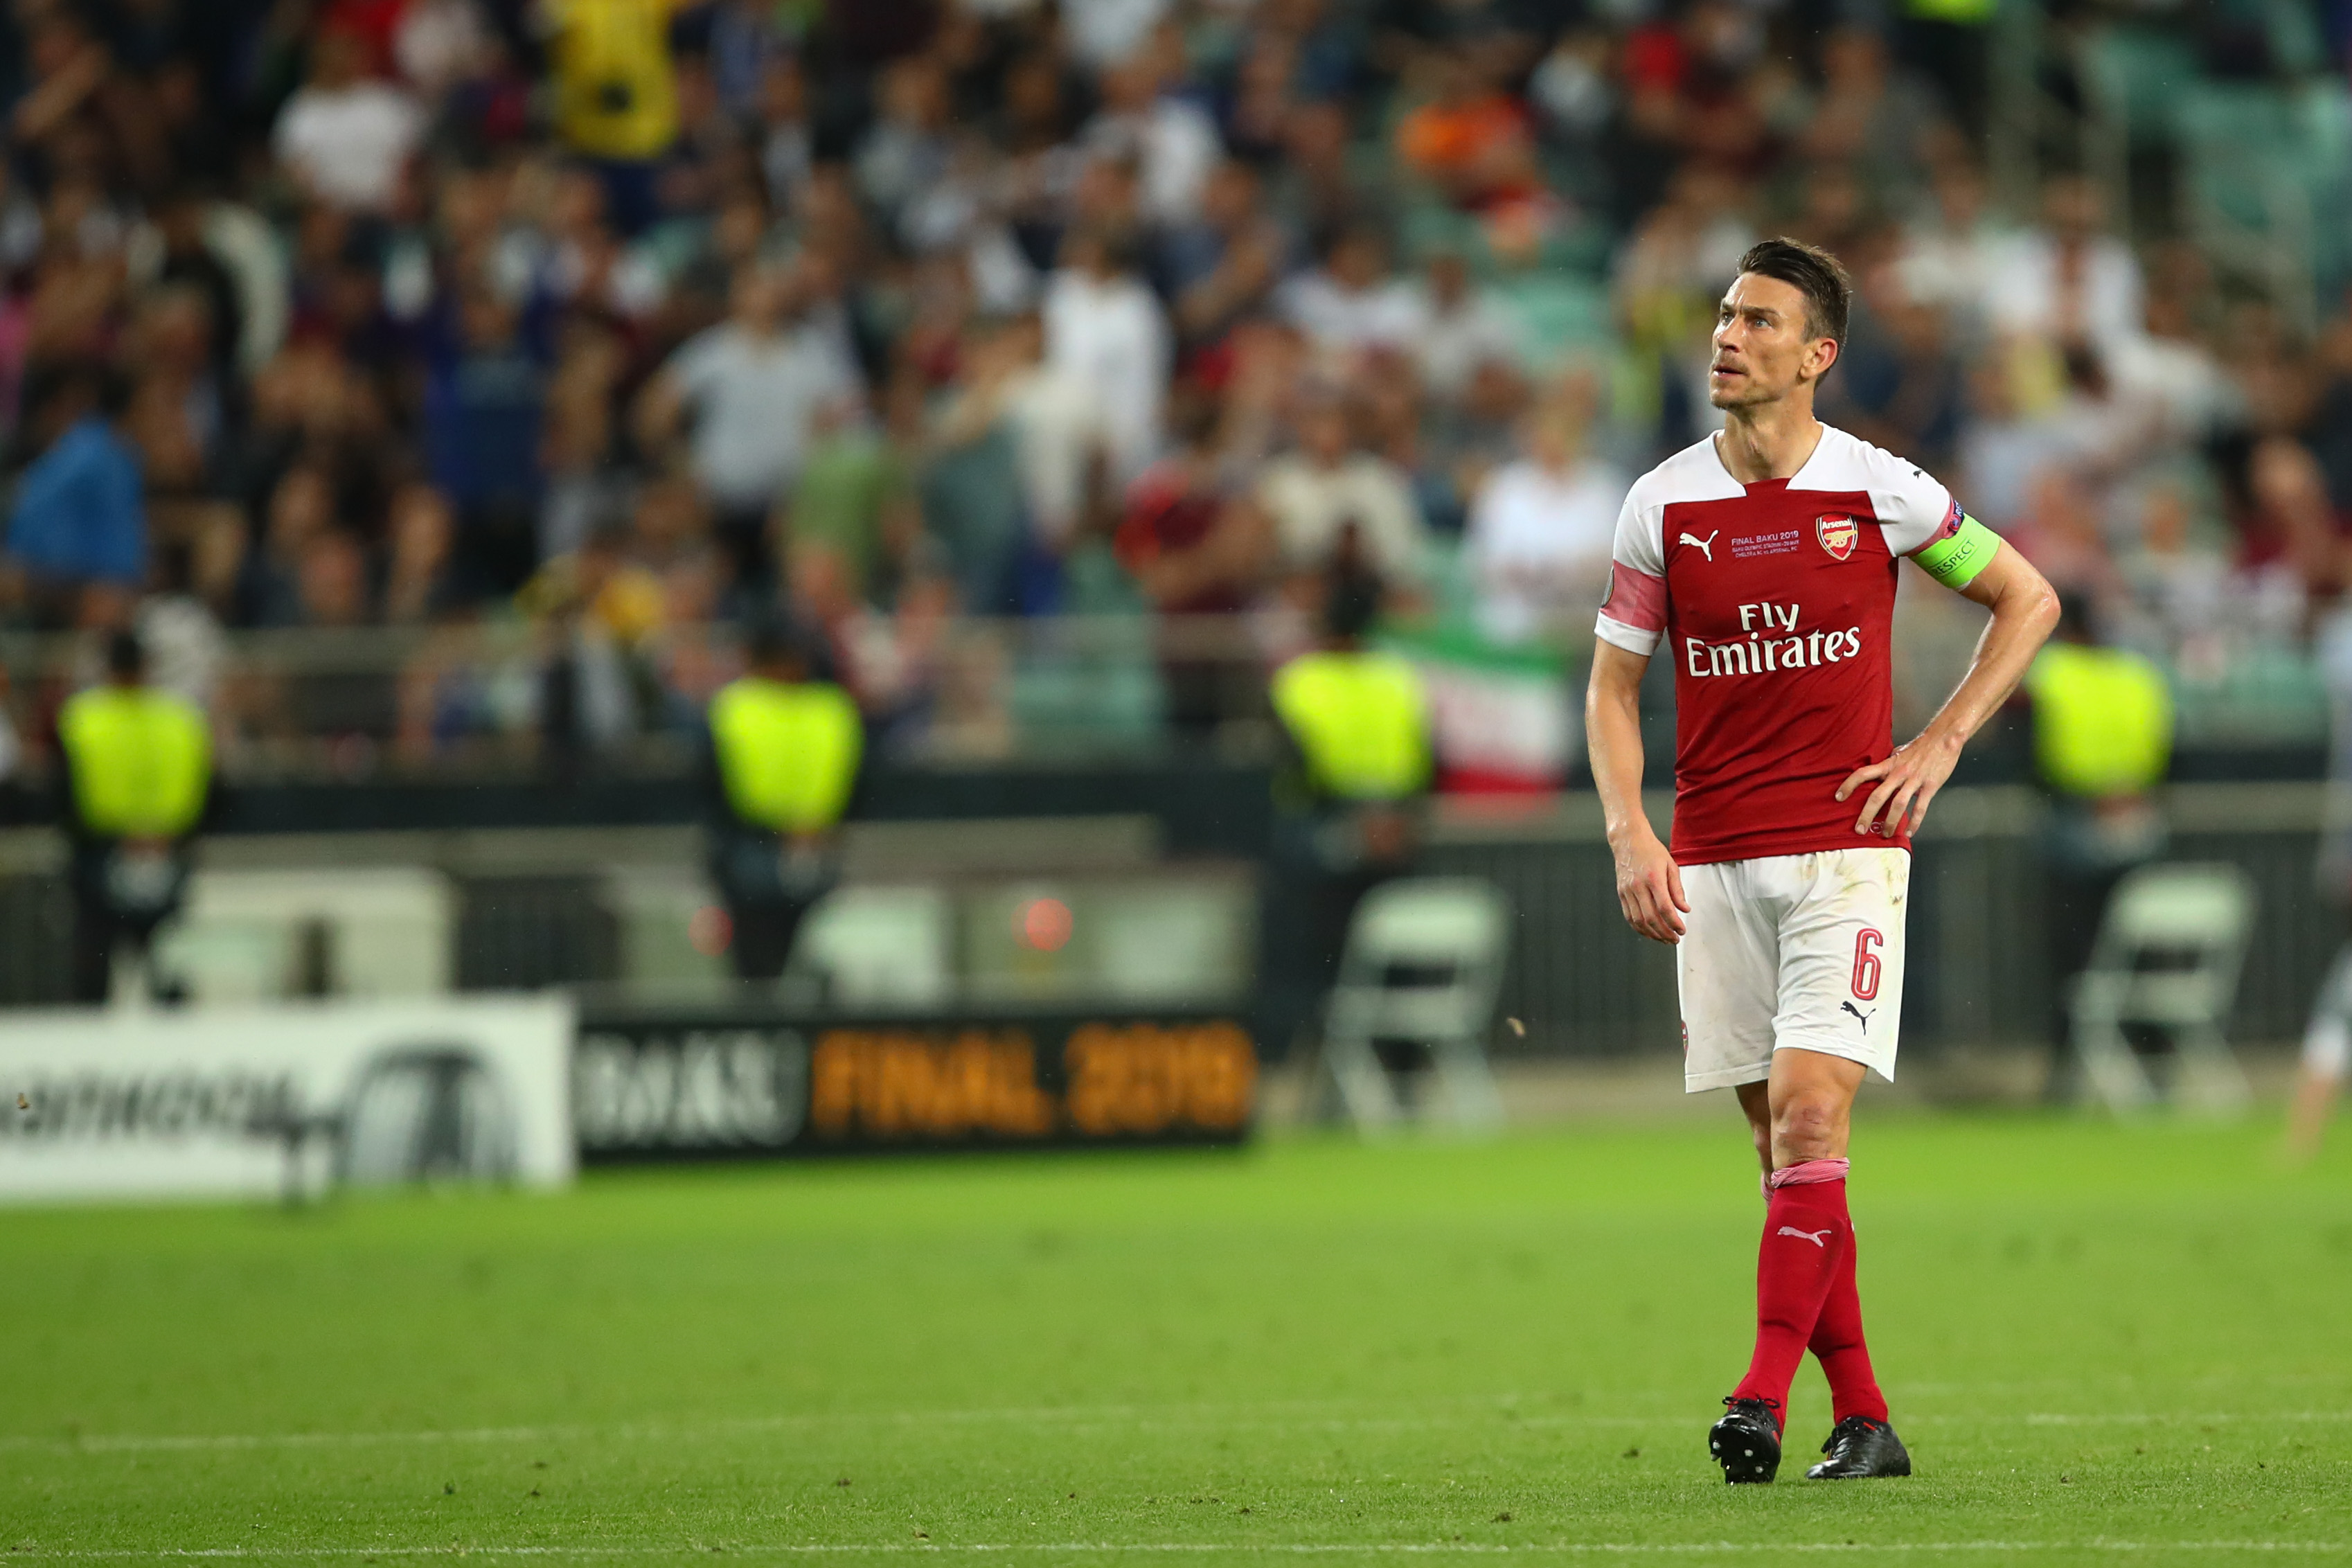 Reports | Stade Rennes have not given up on Laurent Koscielny